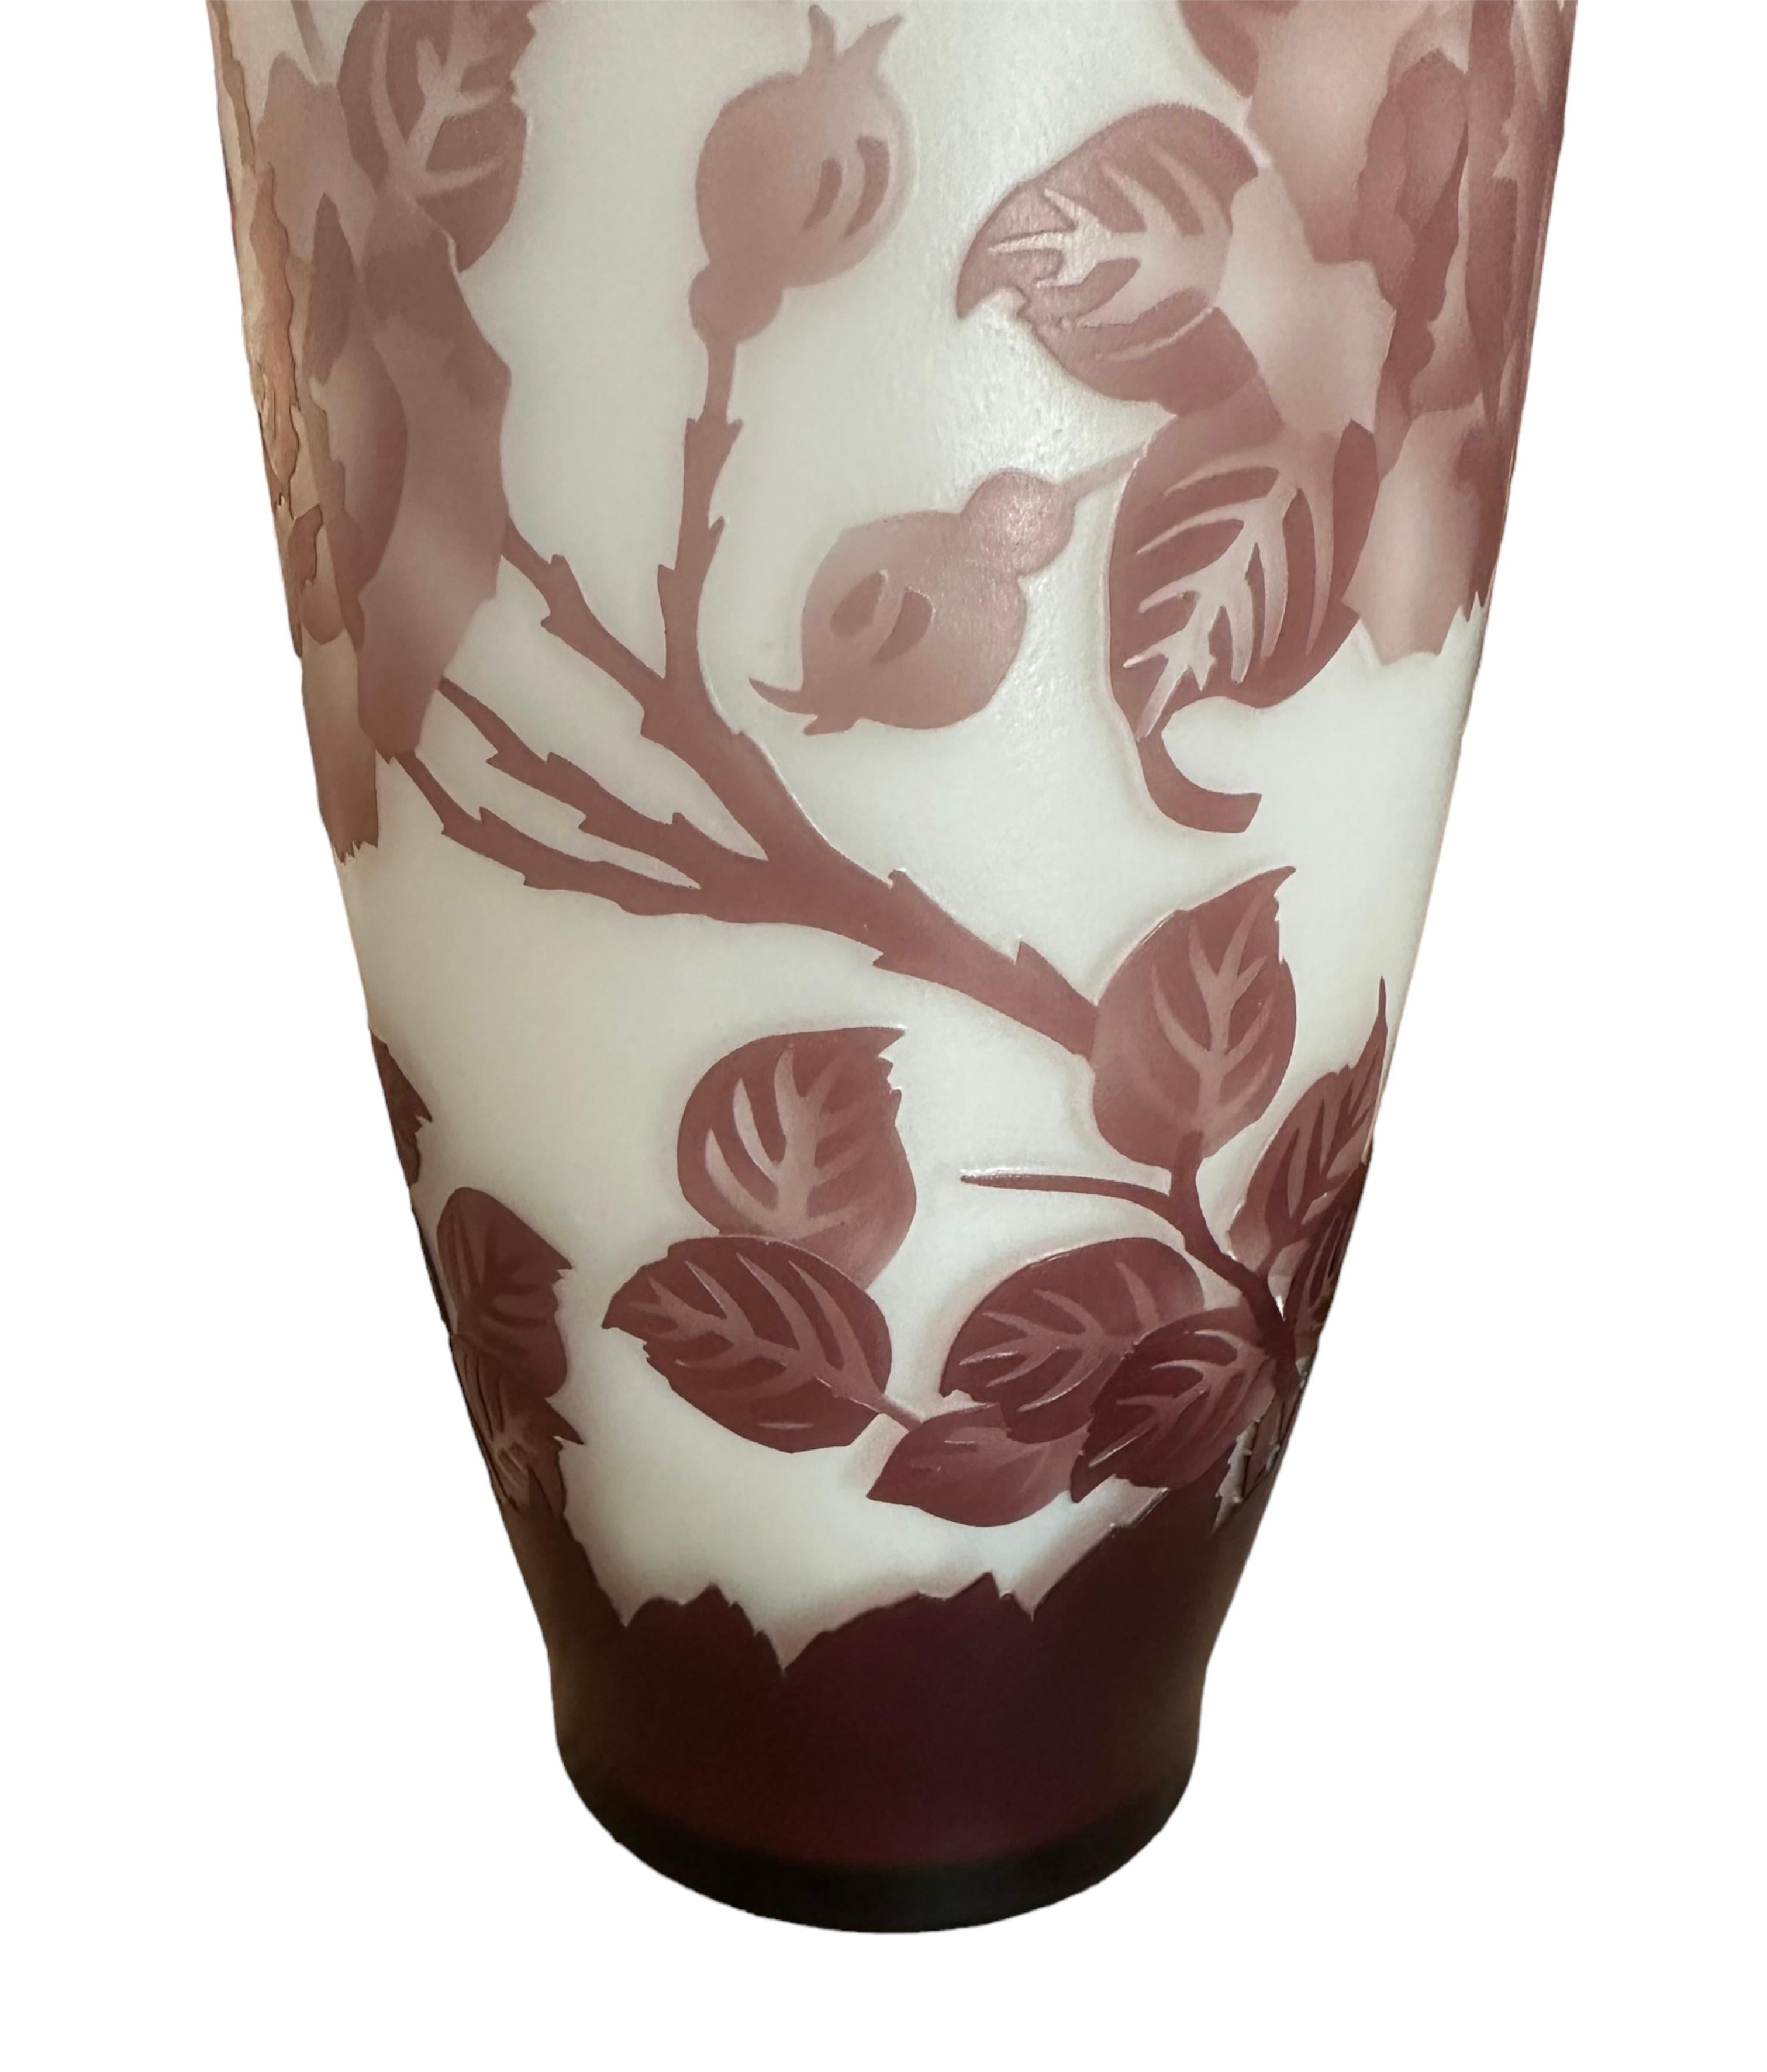 American Signed Galle, Etched Art Glass Vase with Burgundy Flowers